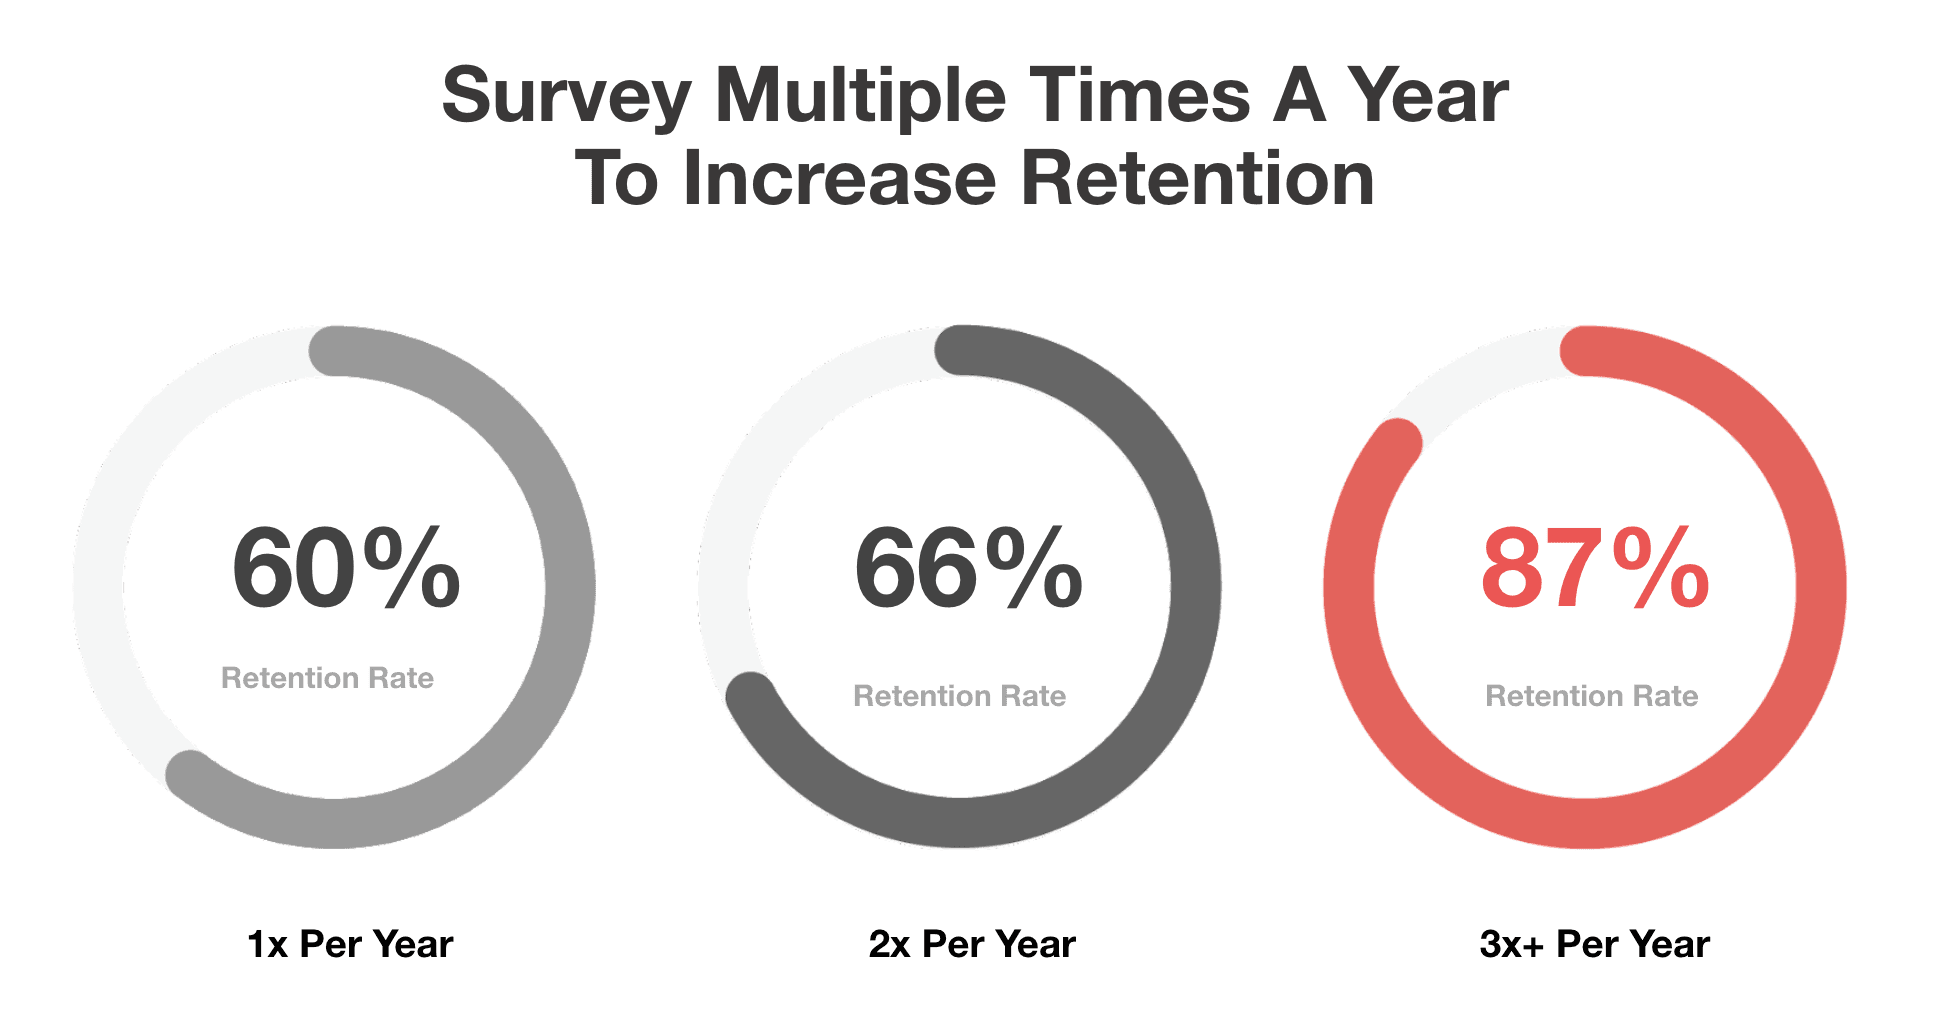 Survey 4x a Year to Increase Retention